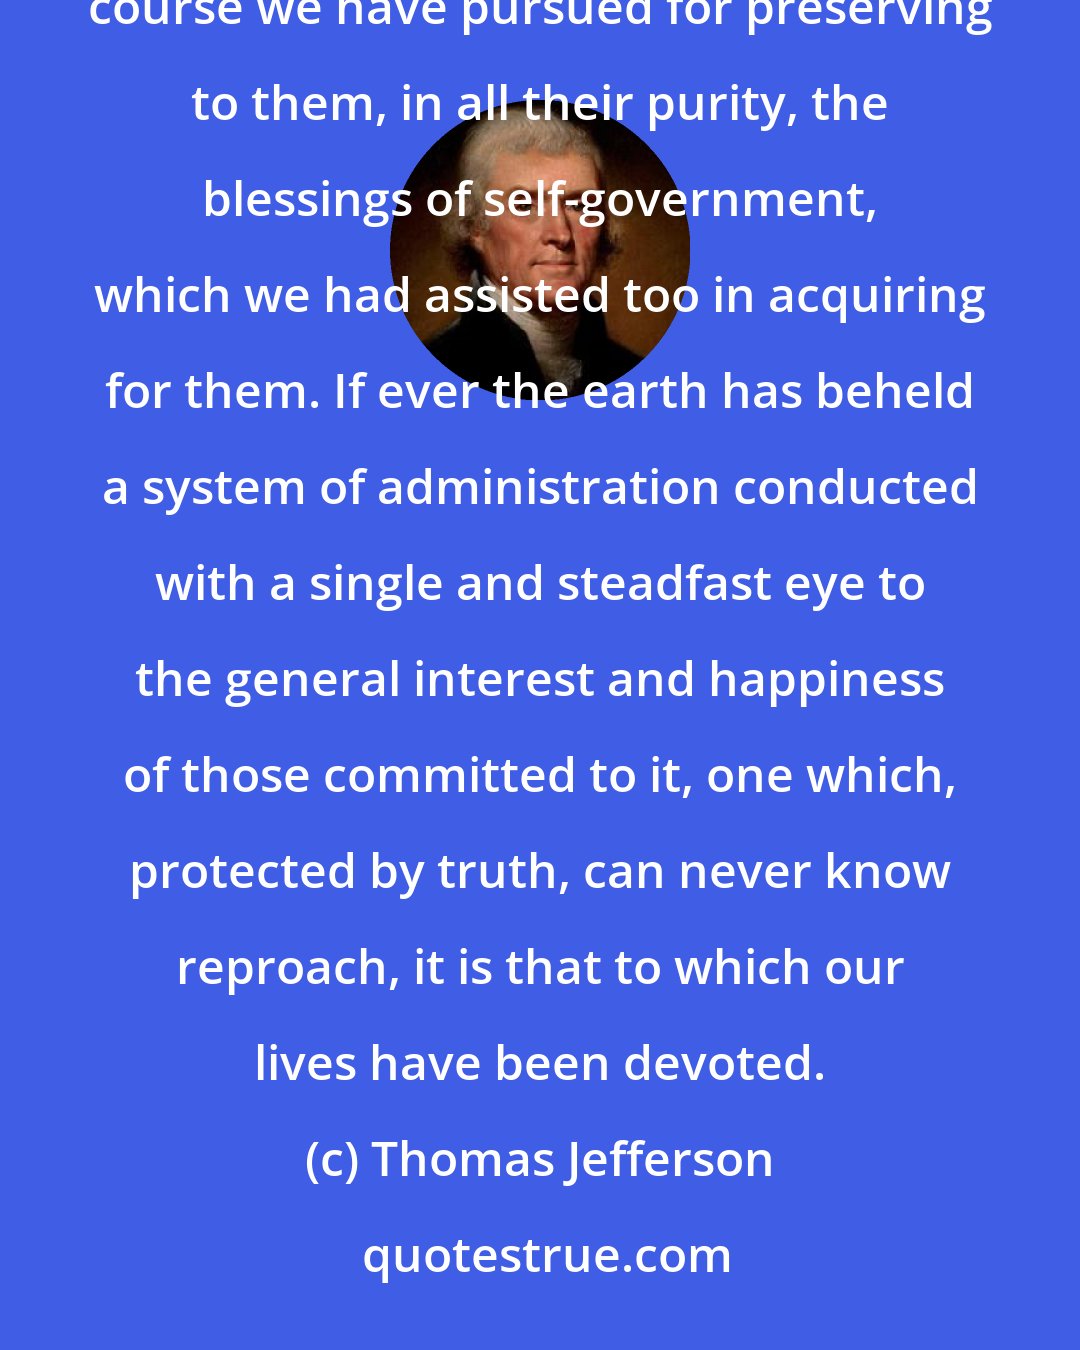 Thomas Jefferson: It has also been a great solace to me, to believe that you are engaged in vindicating to posterity the course we have pursued for preserving to them, in all their purity, the blessings of self-government, which we had assisted too in acquiring for them. If ever the earth has beheld a system of administration conducted with a single and steadfast eye to the general interest and happiness of those committed to it, one which, protected by truth, can never know reproach, it is that to which our lives have been devoted.